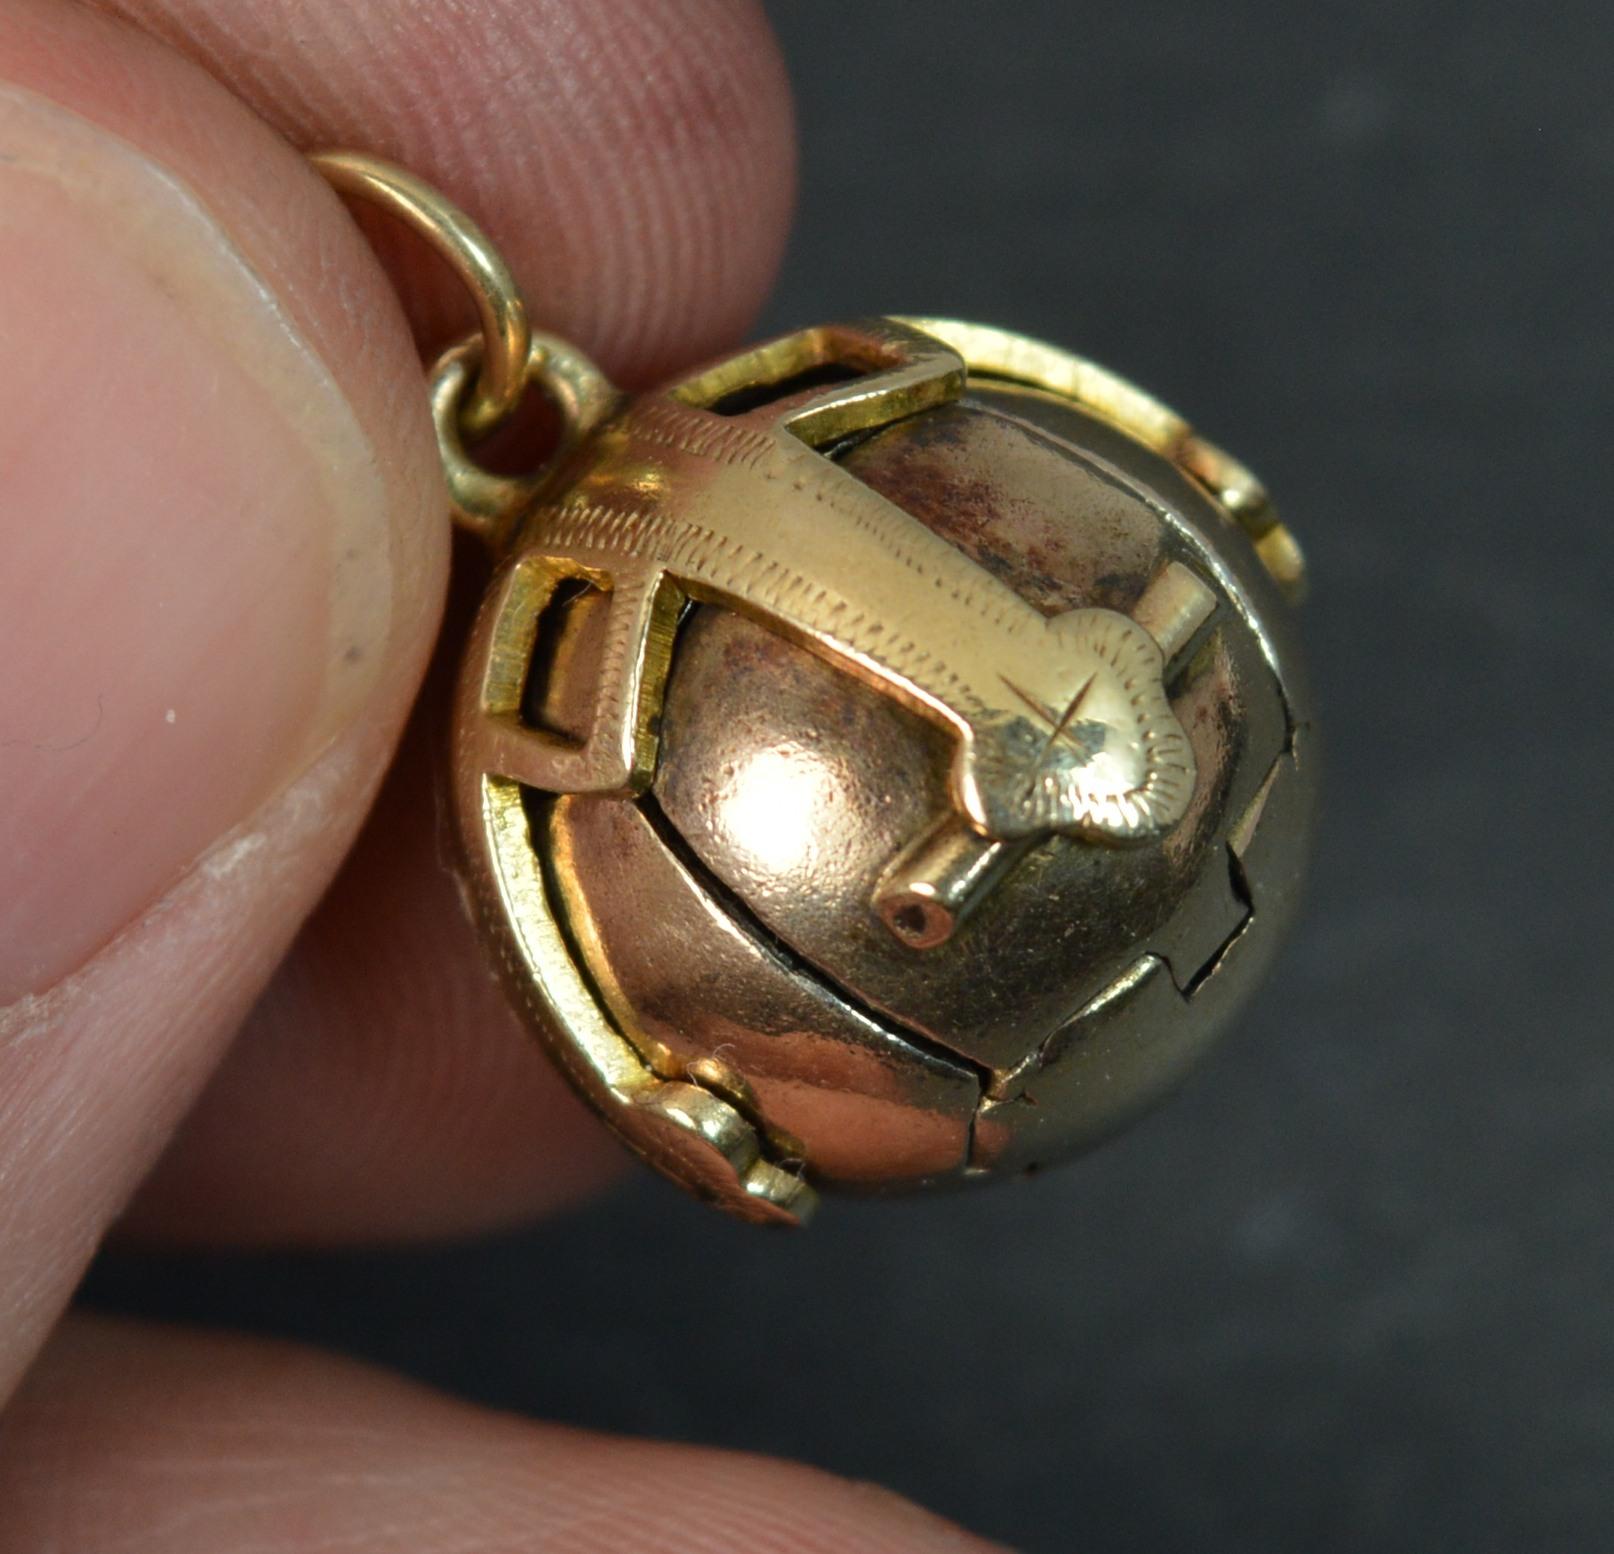 
Fine quality solid Masonic / mason's ball. Opens up fully. Stylish piece. 9ct gold on silver ball and solid 9 carat gold top. True vintage piece.

CONDITION ; Good for age. Crisp design. Opens up nicely. Stays closed. Please view